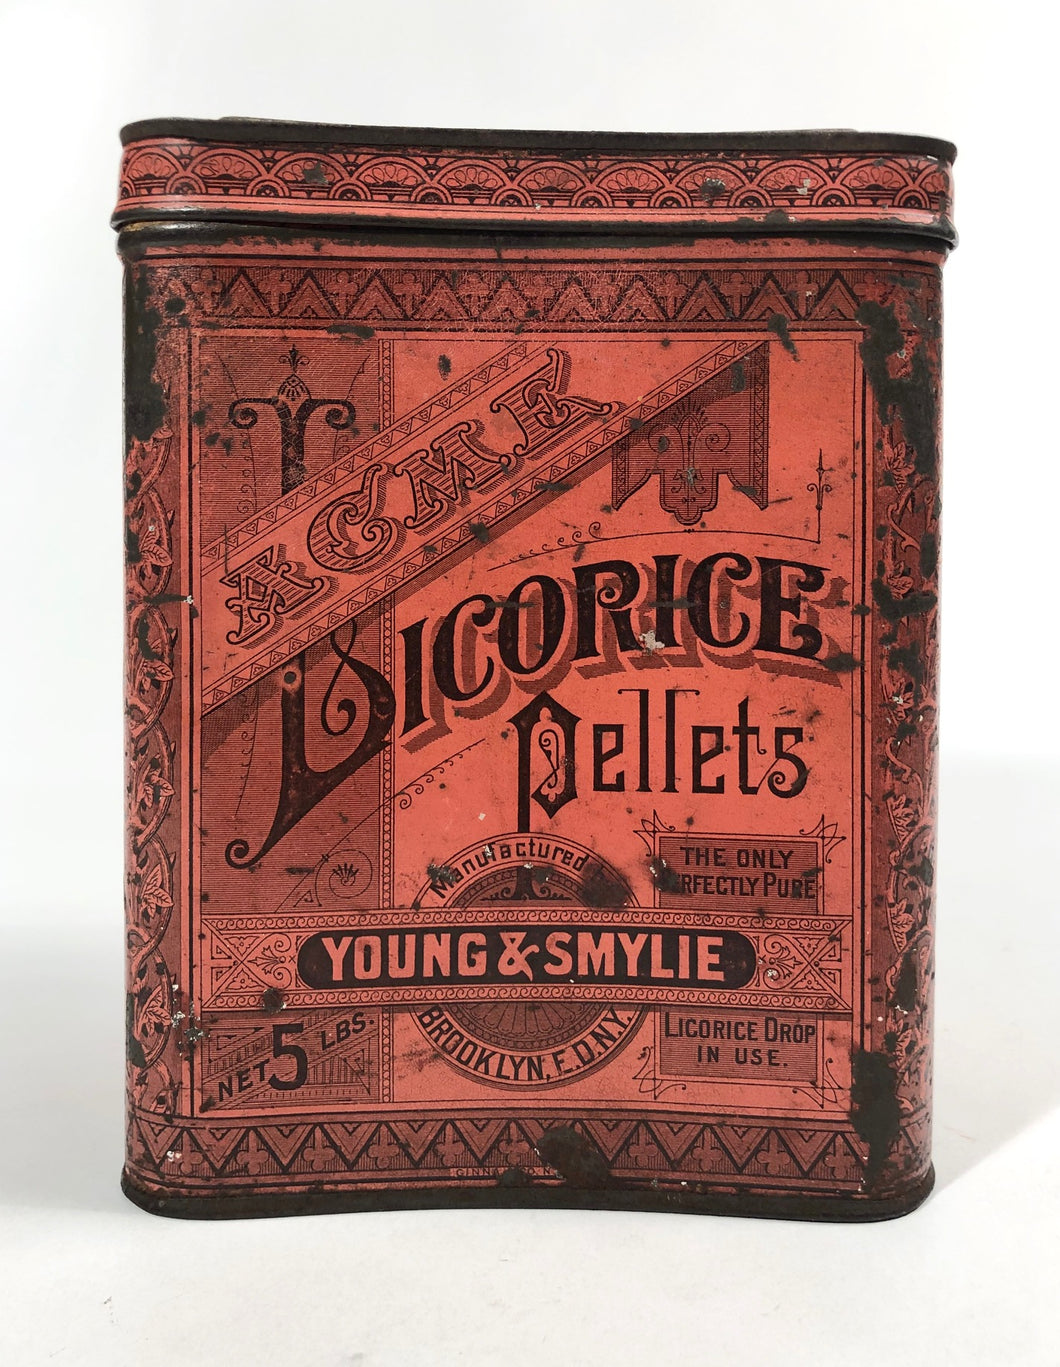 Young & Smylie ACME LICORICE PELLETS 5 lb Tin Cannister || Licorice Drops